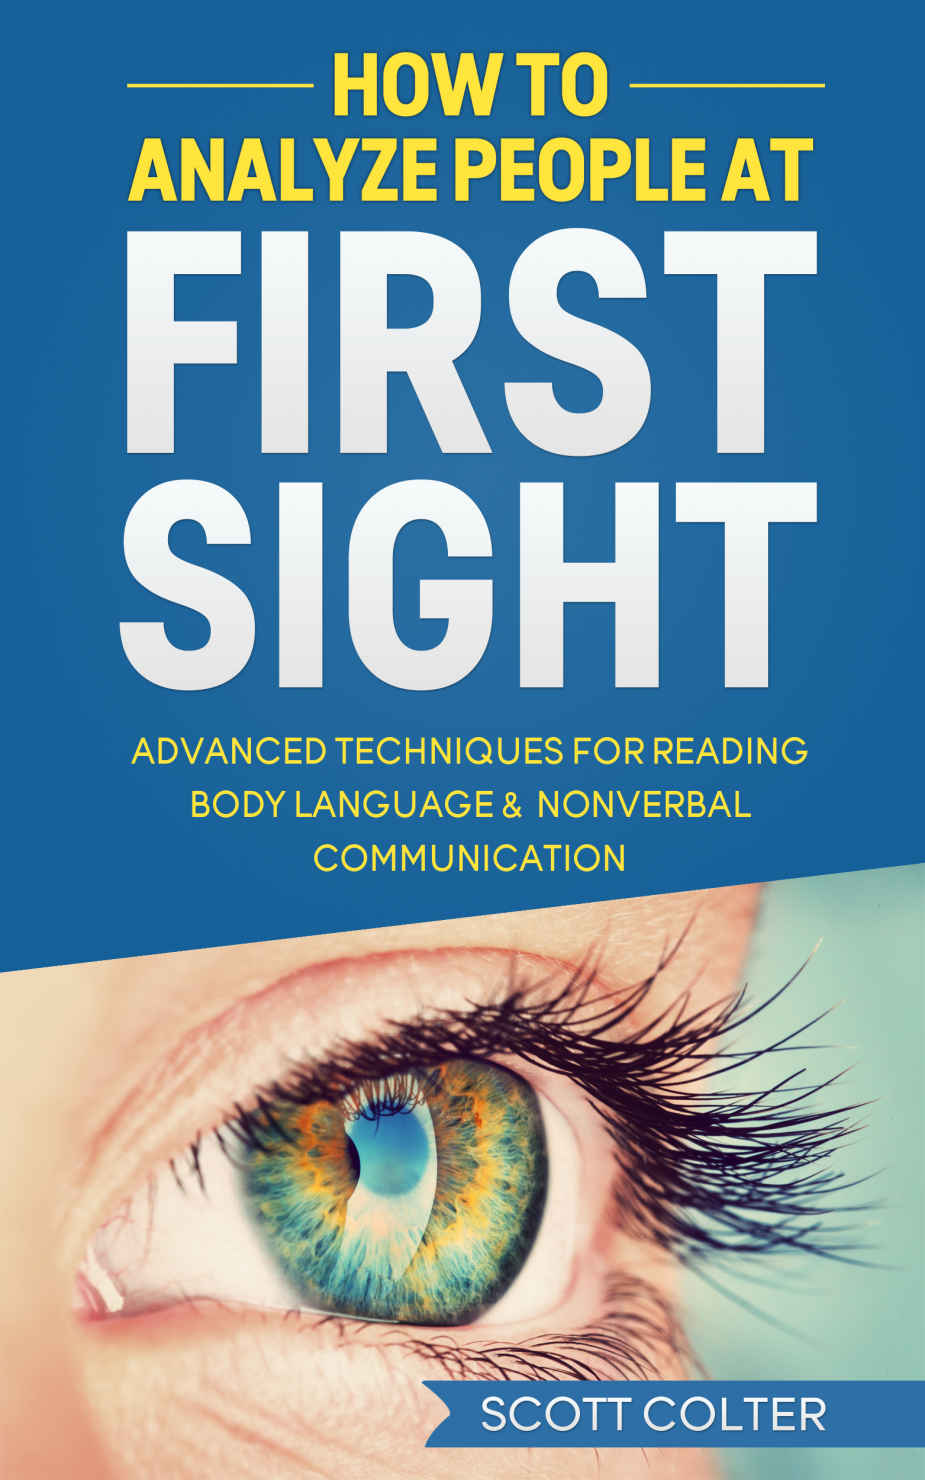 How to Analyze People at First Sight: Advanced Techniques for Reading Body Language & Non-Verbal Communication (How To Analyze People, Psychology, Self ... To Read People) (Human Psychology Book 2)